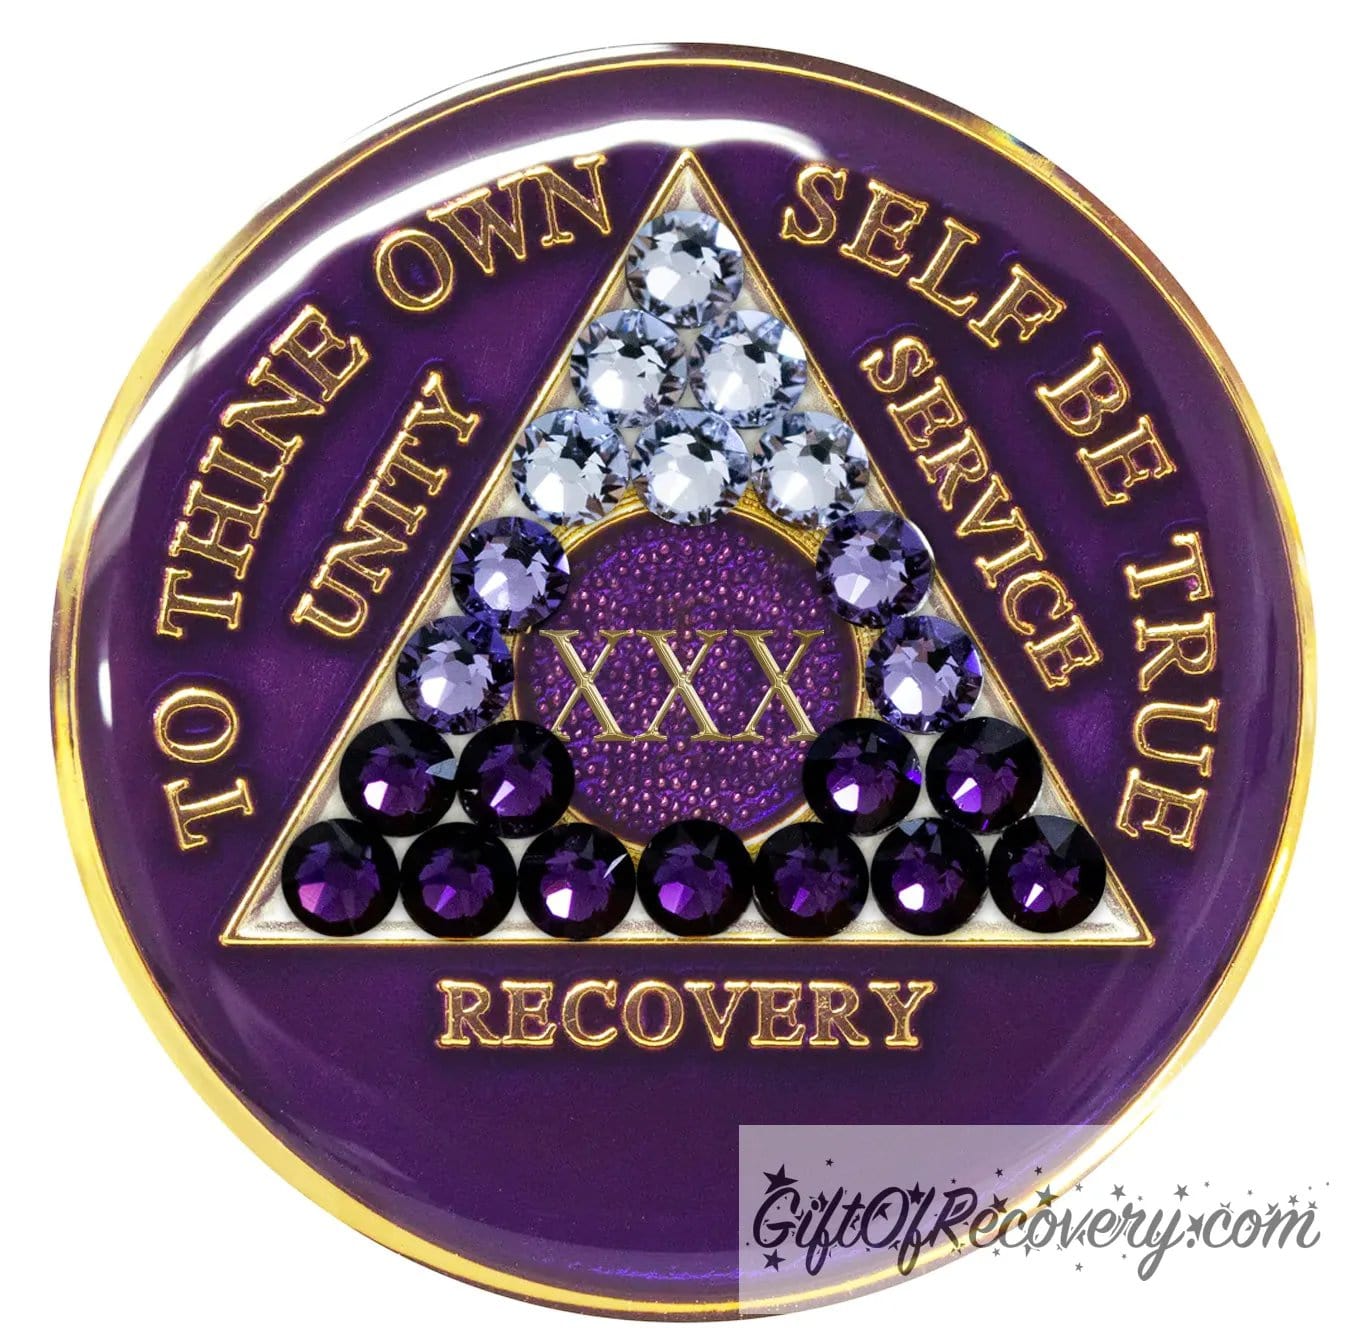 30 year Amethyst purple AA medallion with 21 genuine crystals ranging from light to dark for symbolism of transition, the triangle, circle, roman numeral, unity, recovery, service, and to thine own self be true, are embossed with 14k gold, while the middle of the circle with the roman numeral is purple glitter, the recovery medallion is sealed with resin for a glossy finish. 